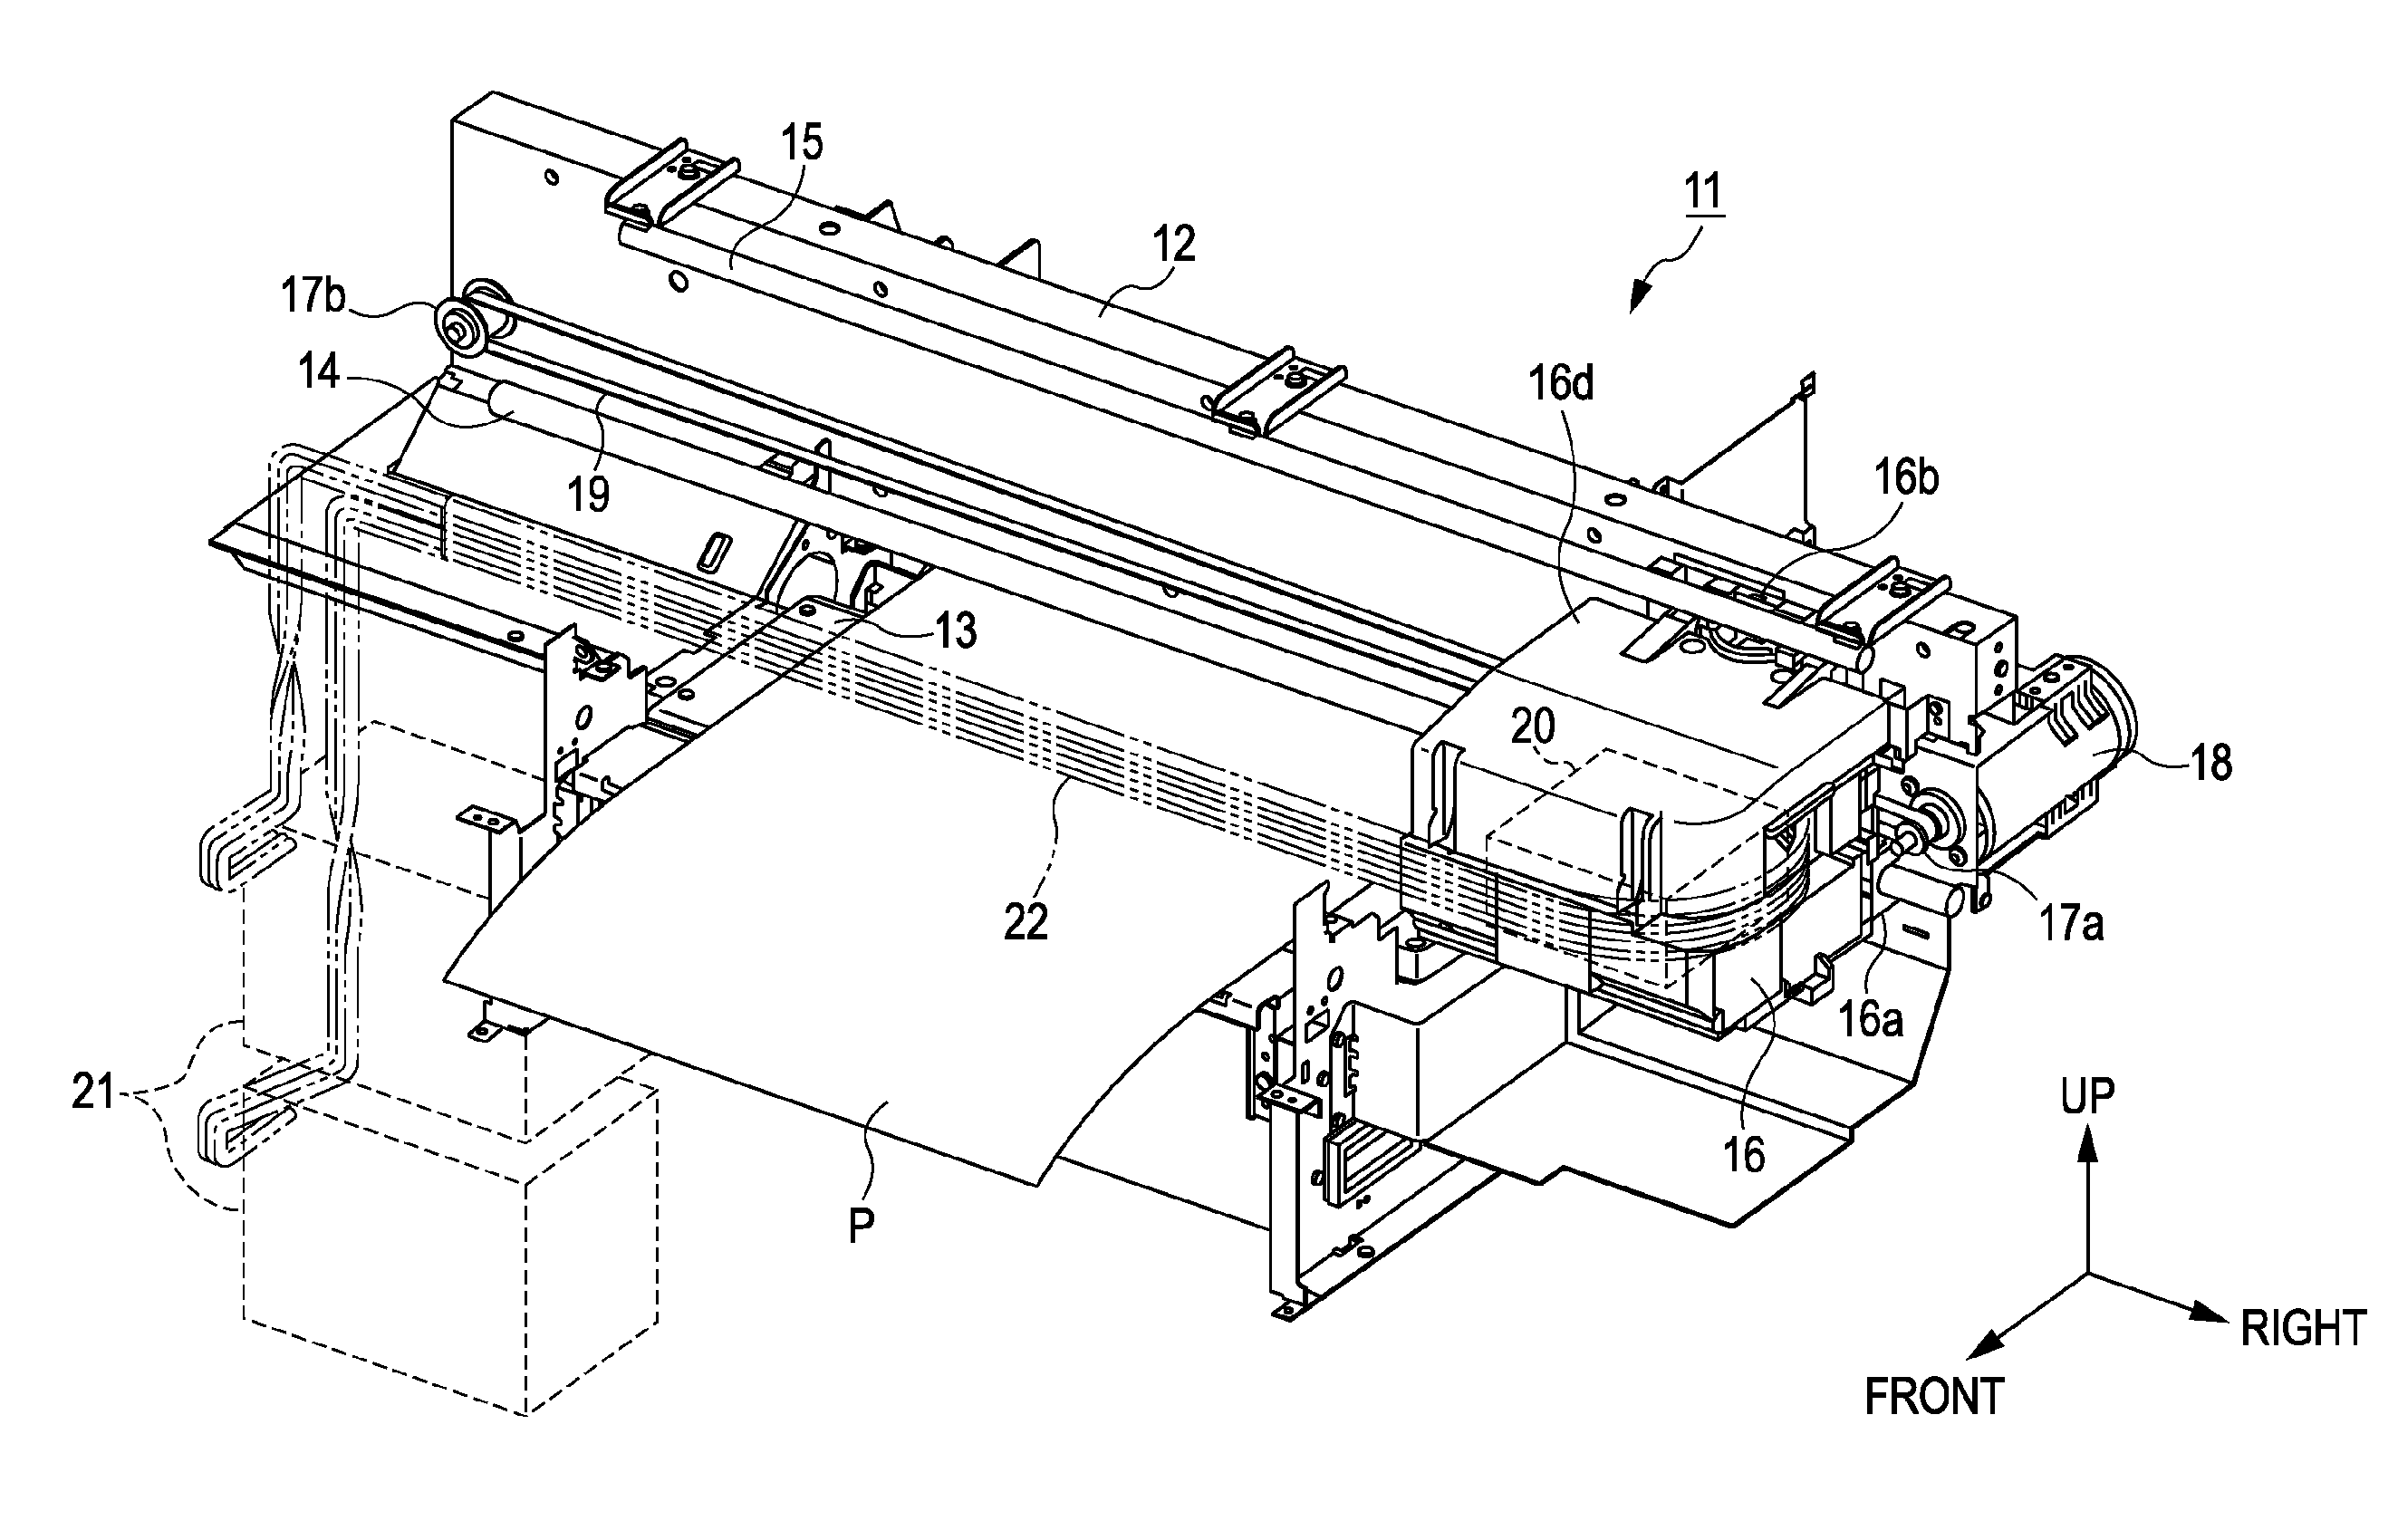 Position adjustment mechanism and recording apparatus